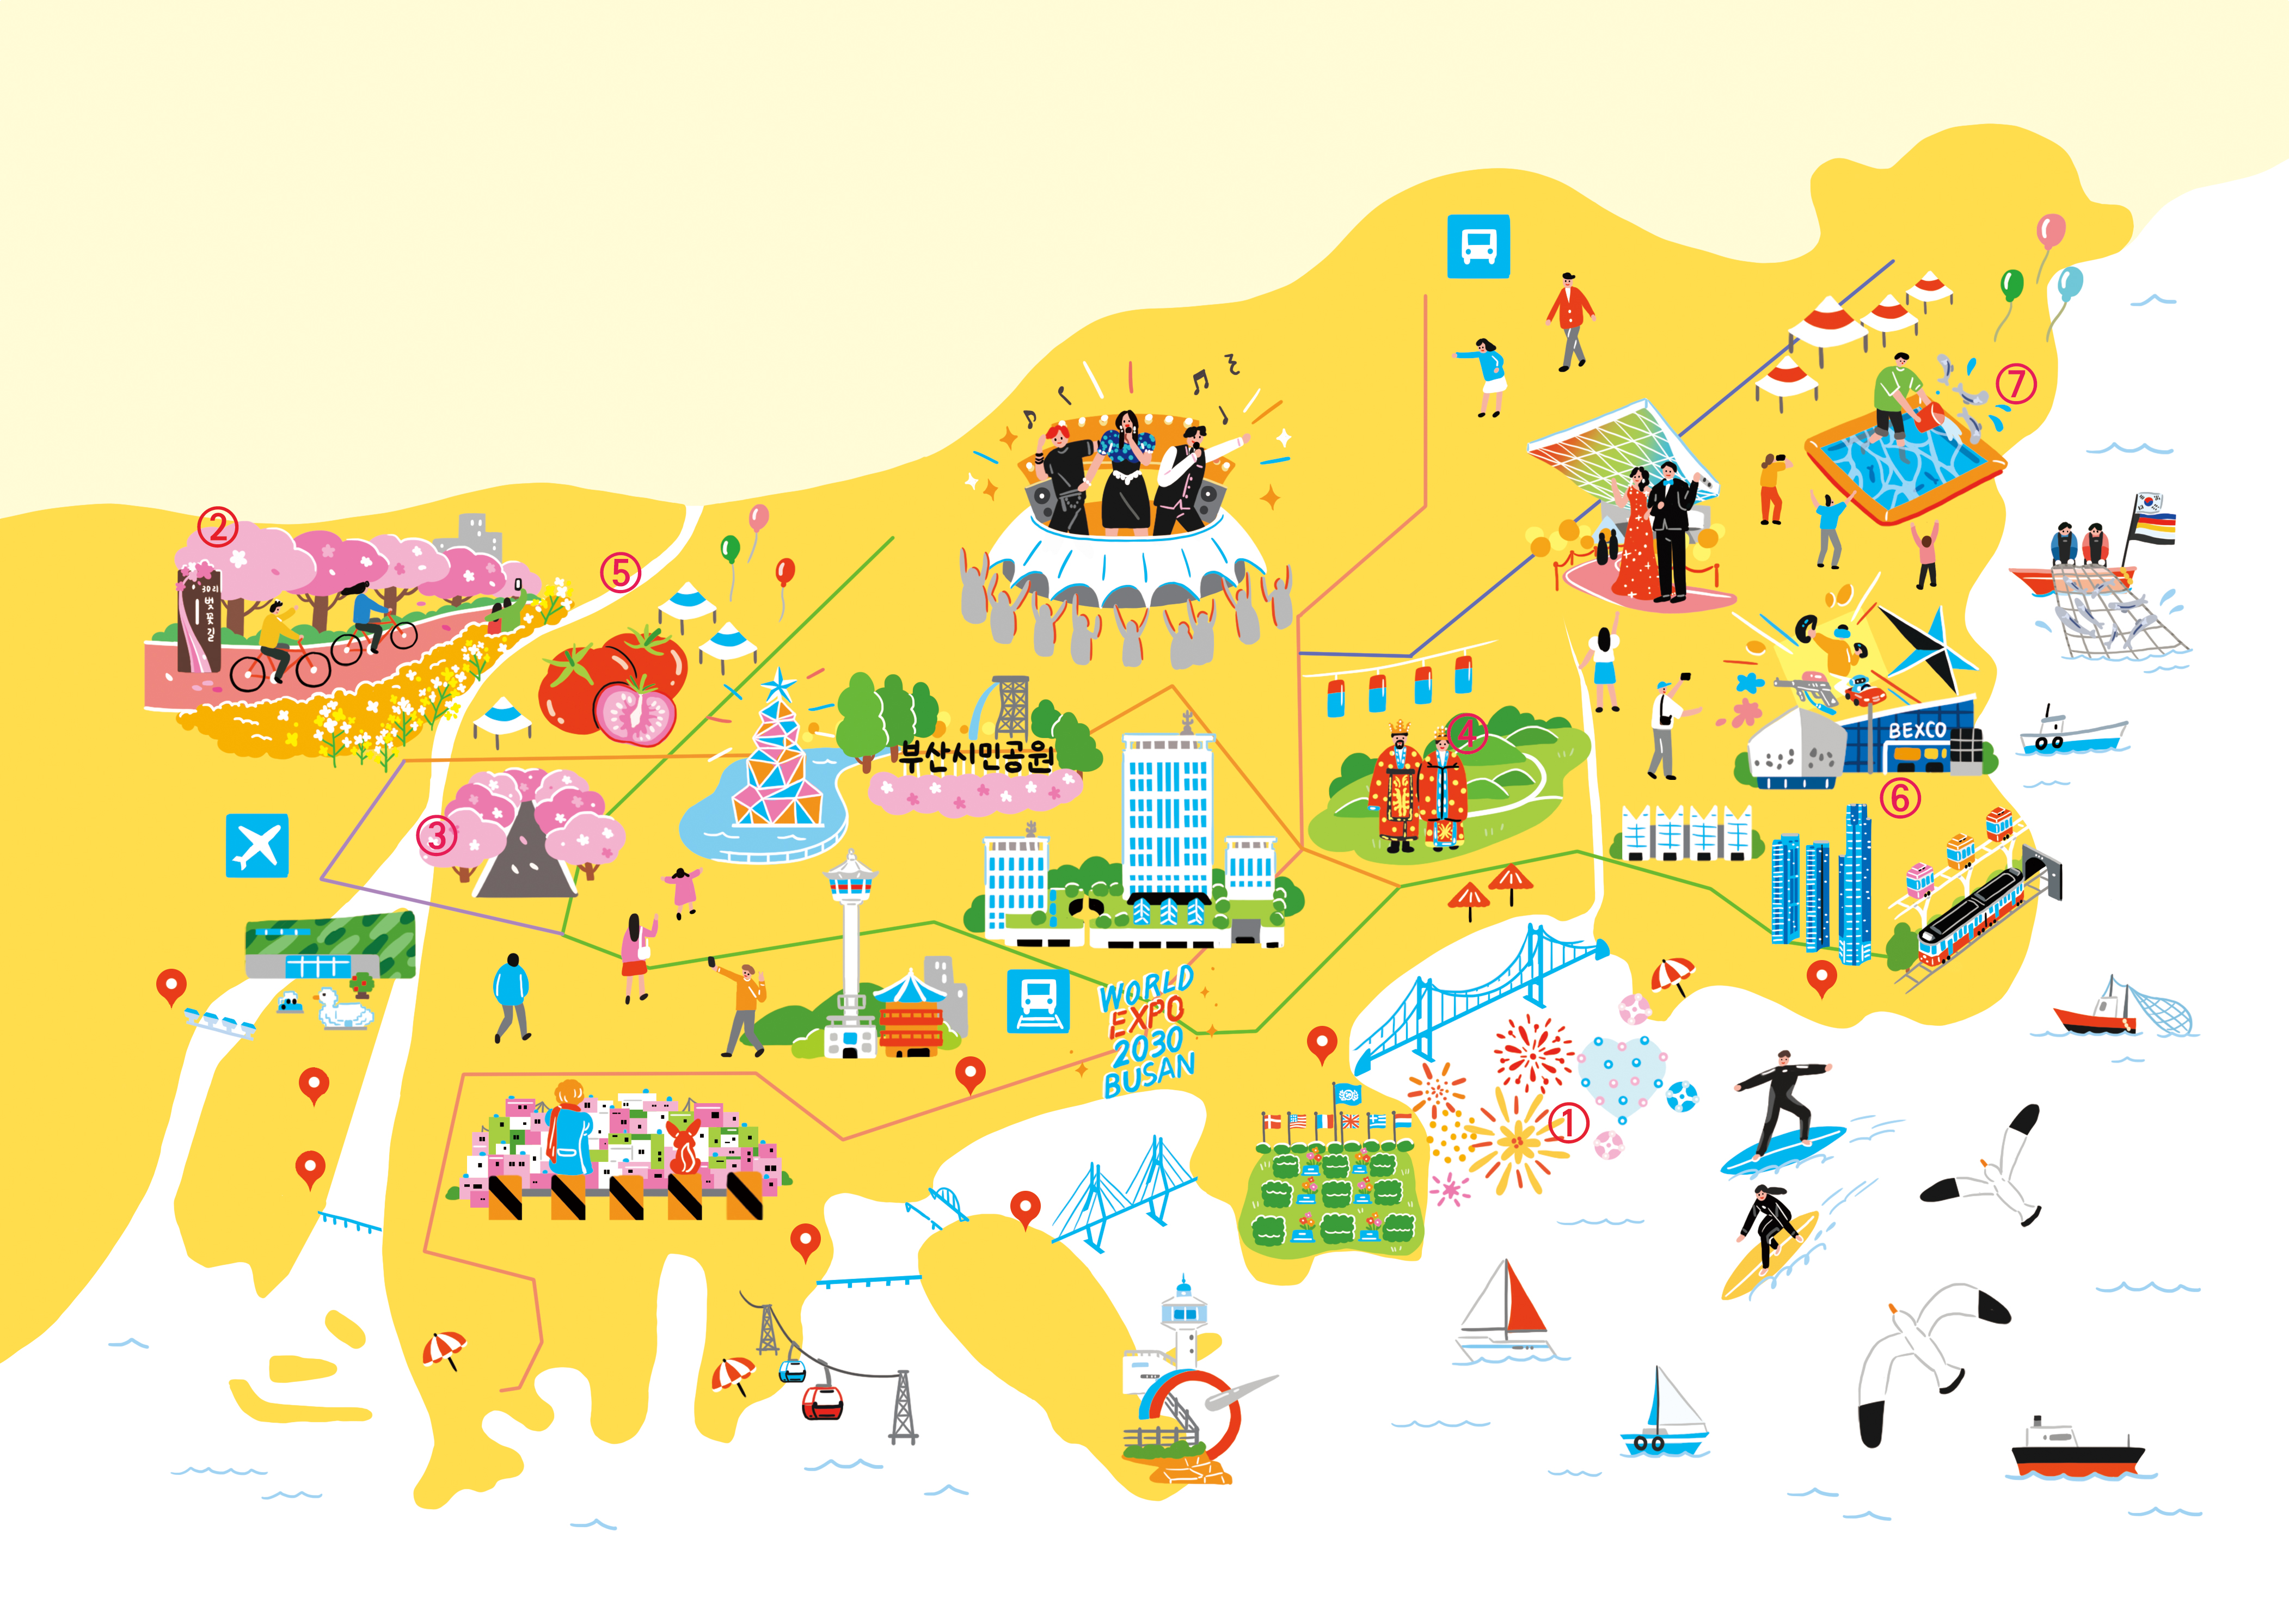 EXPO WEEK to show why 'Busan is Good'